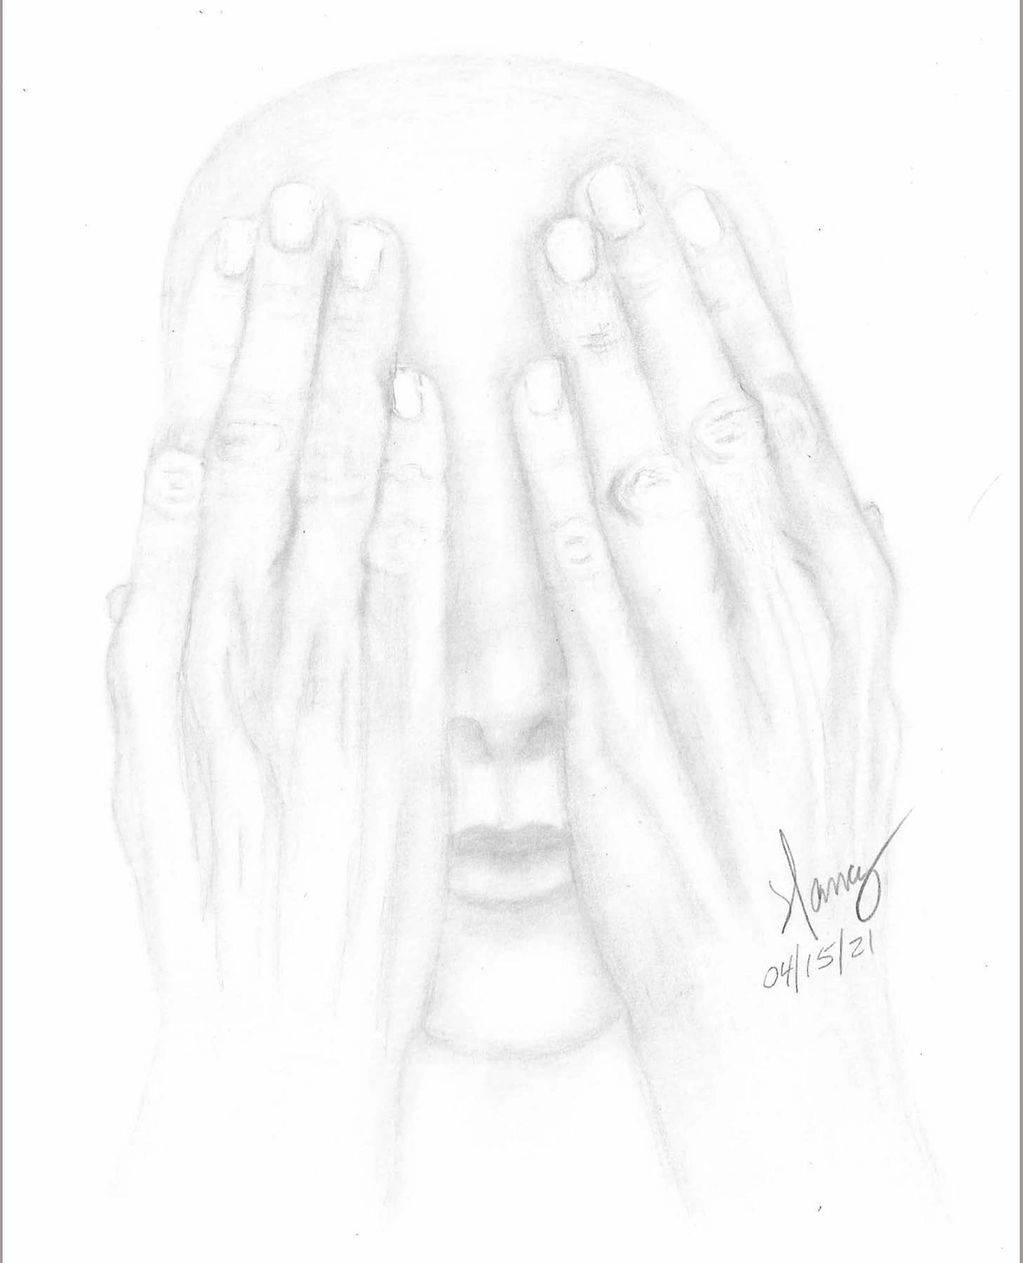 A drawing of hands covering the eyes